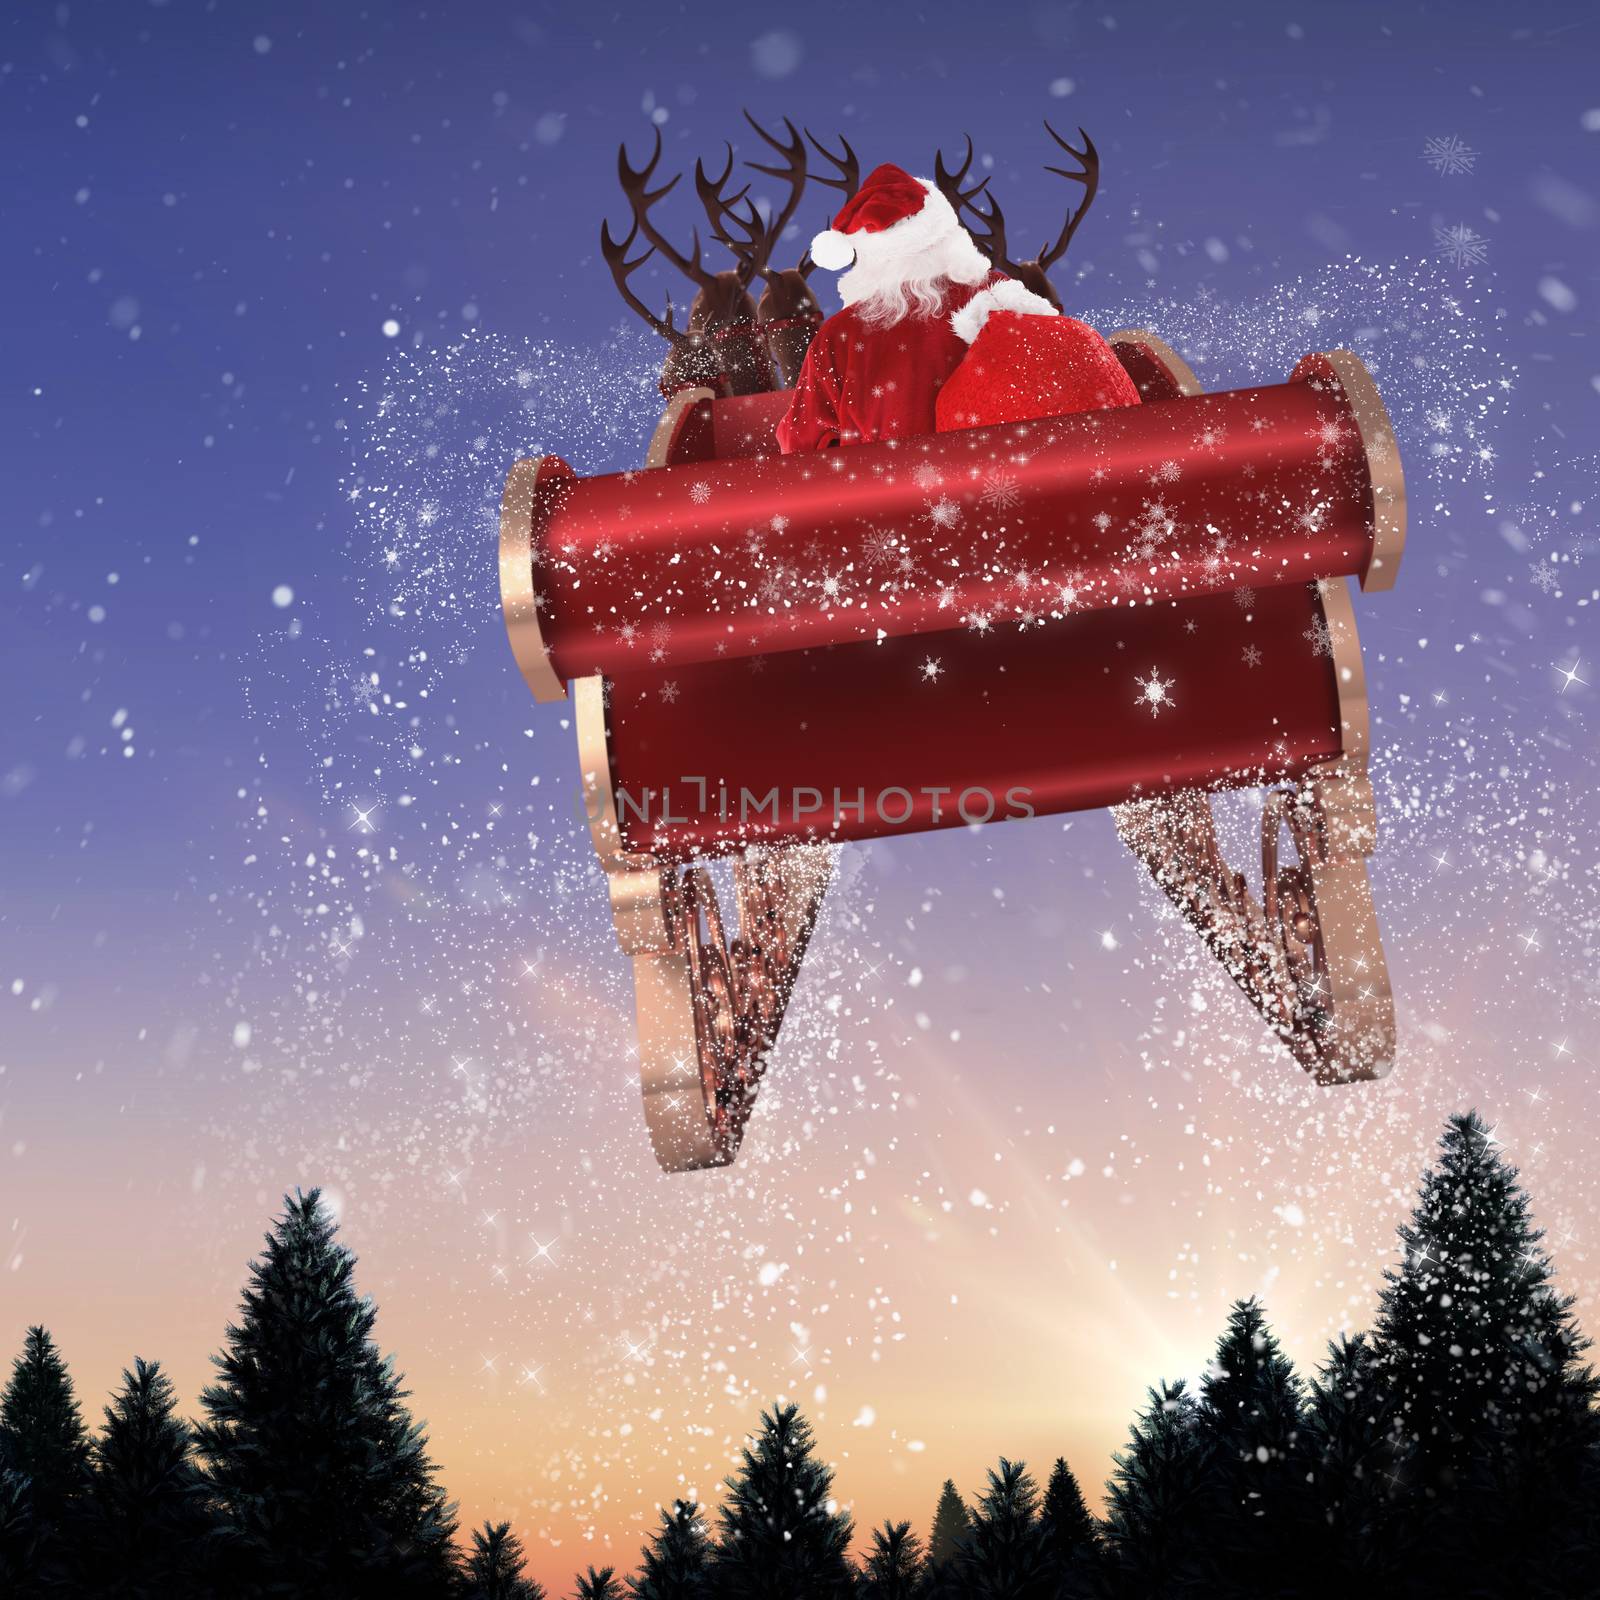 Santa flying his sleigh against snow falling on fir tree forest